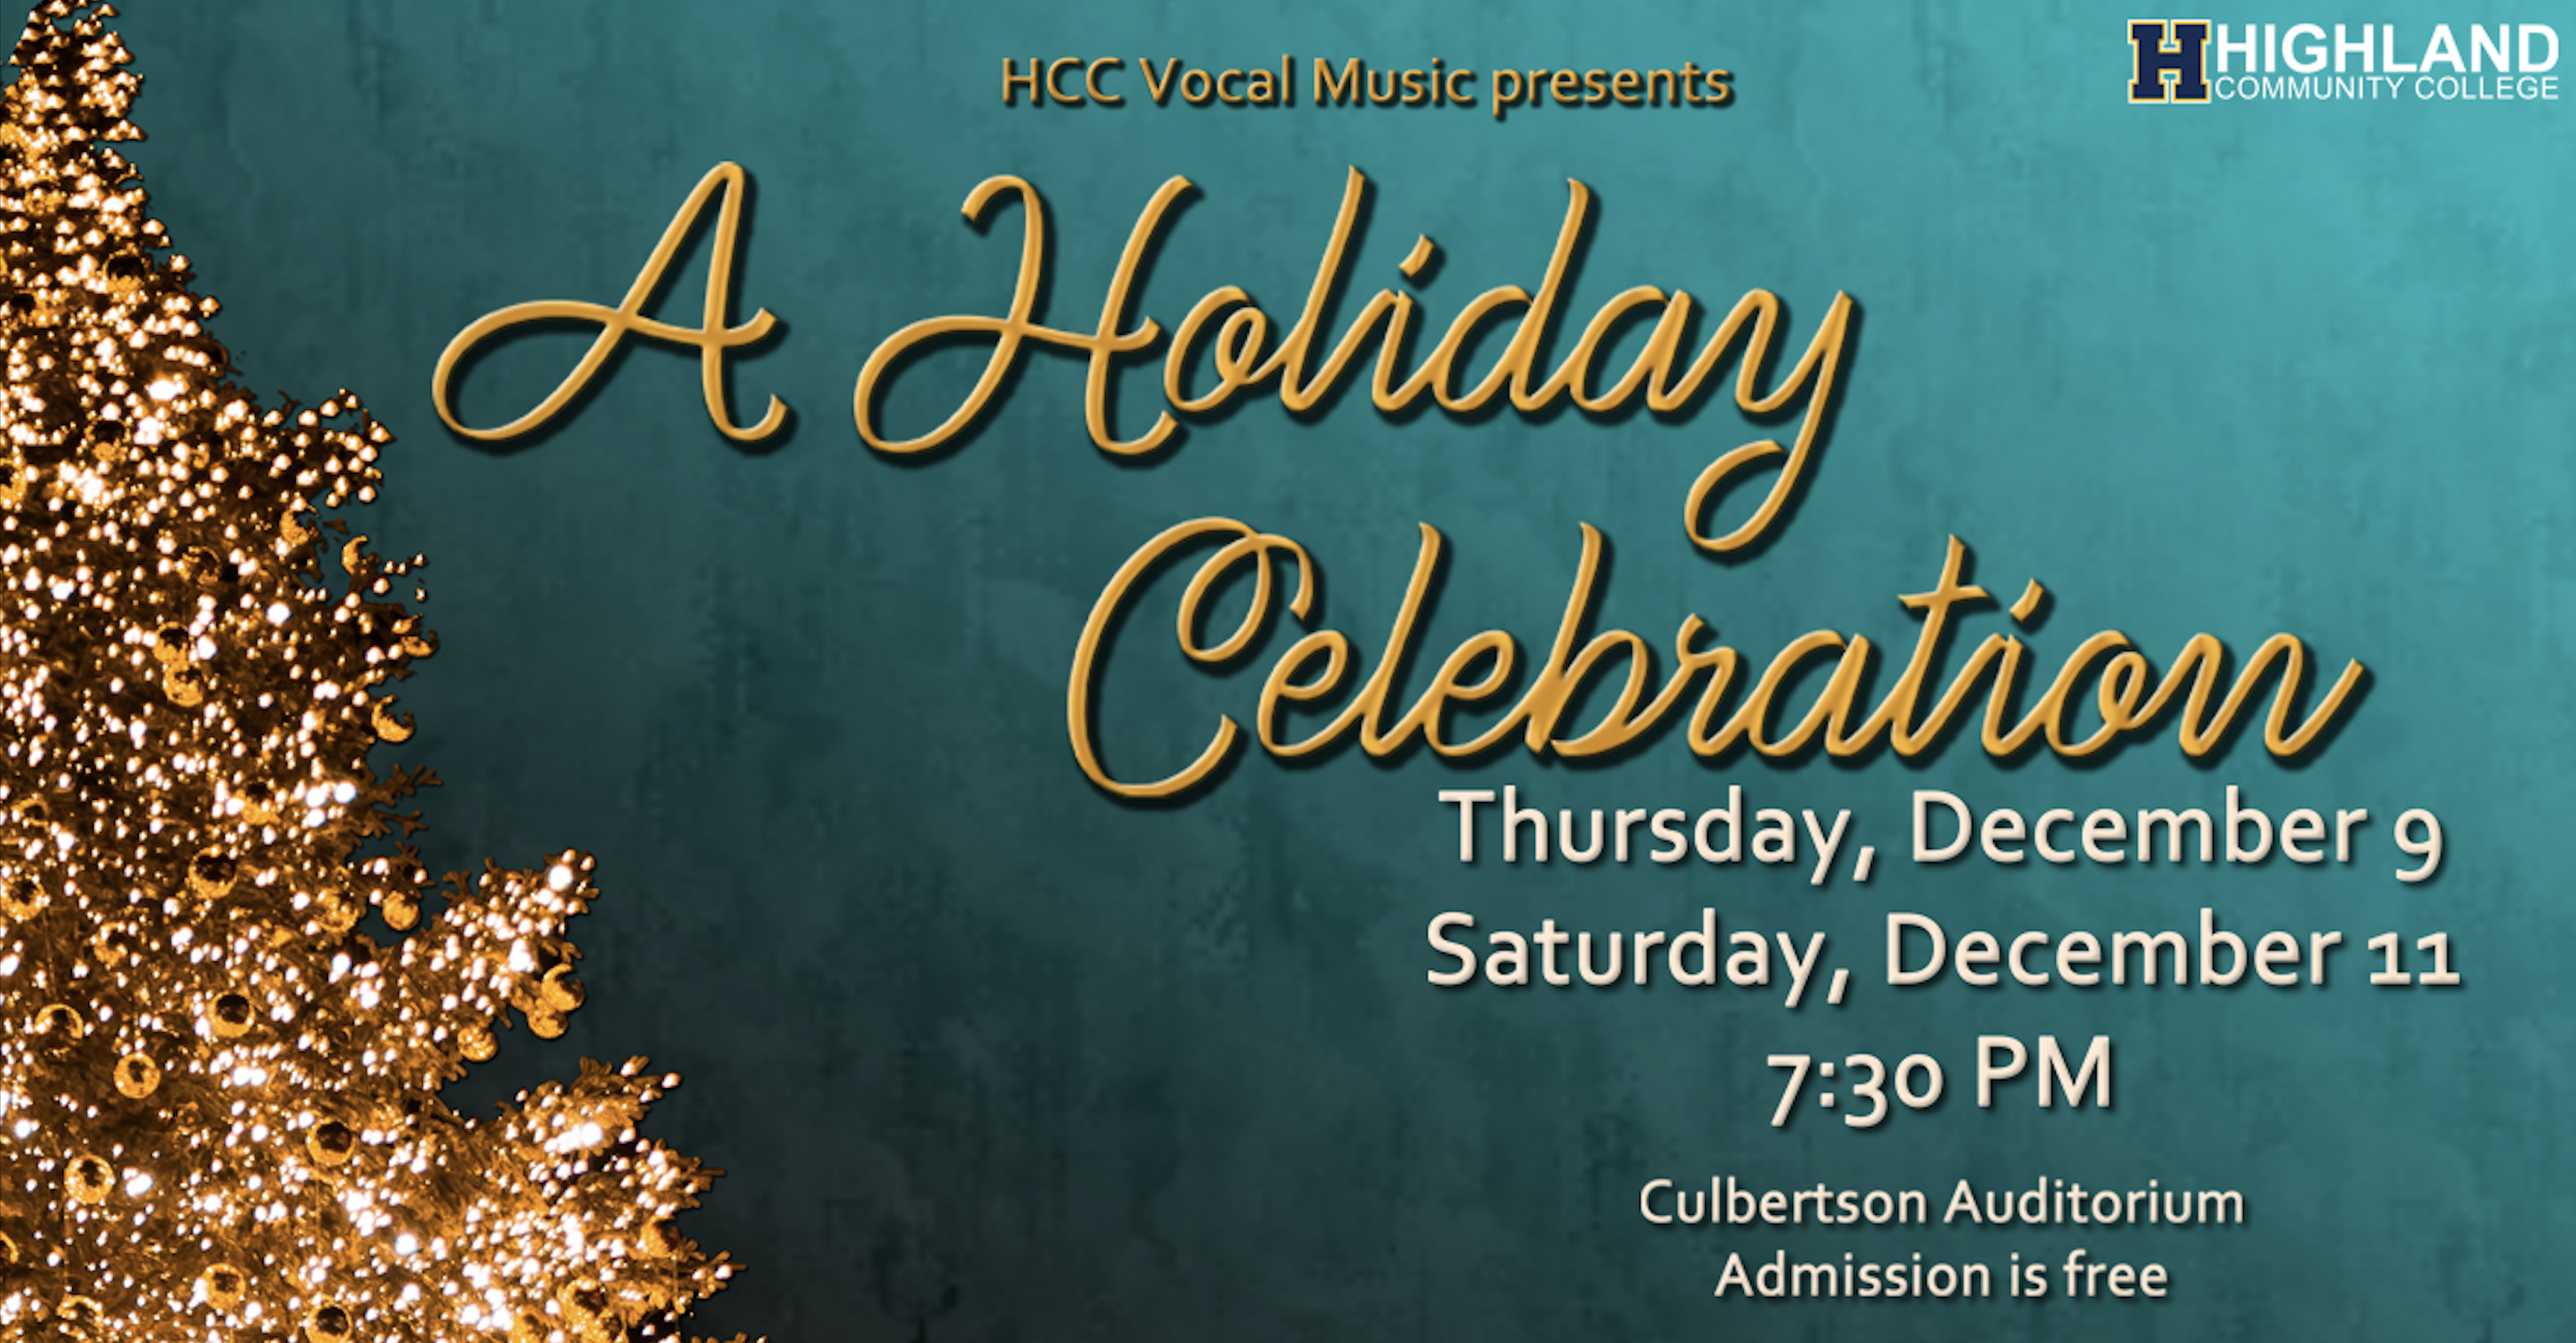 “A Holiday Celebration” in Culbertson Auditorium